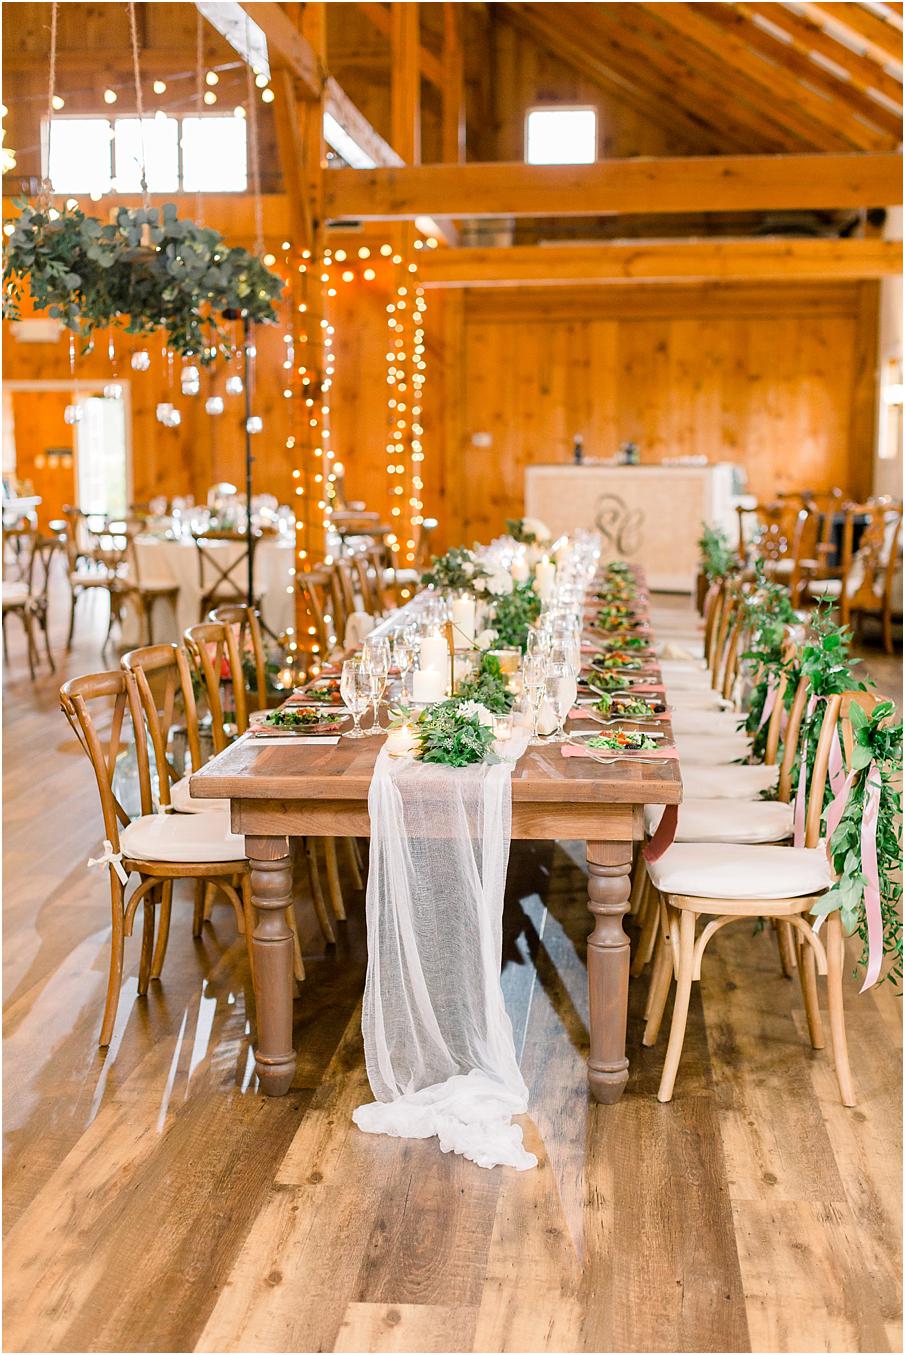 Head table in the barn at Shadow Creek with greenery, lanterns, and white sheer cloth